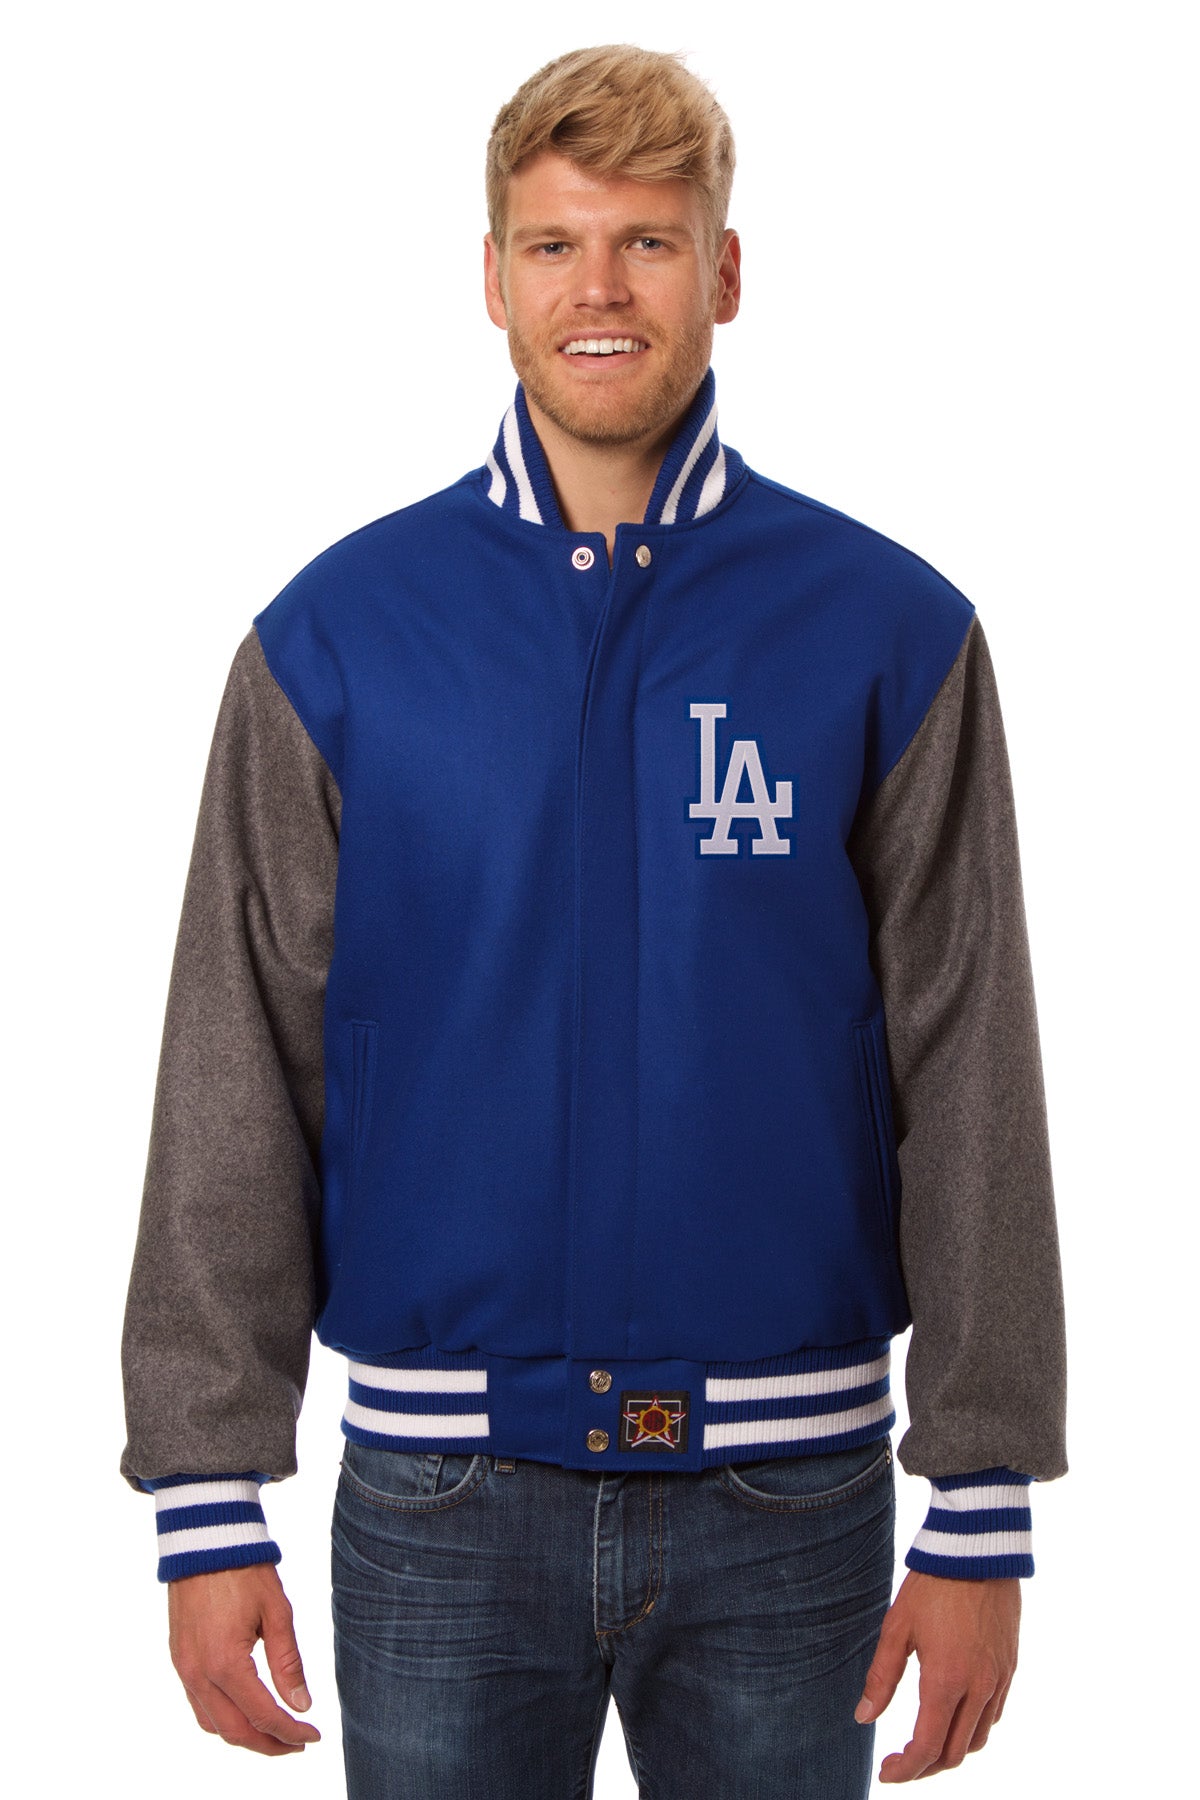 Los Angeles Dodgers Embroidered Wool Jacket - Royal/Charcoal | J.H ...